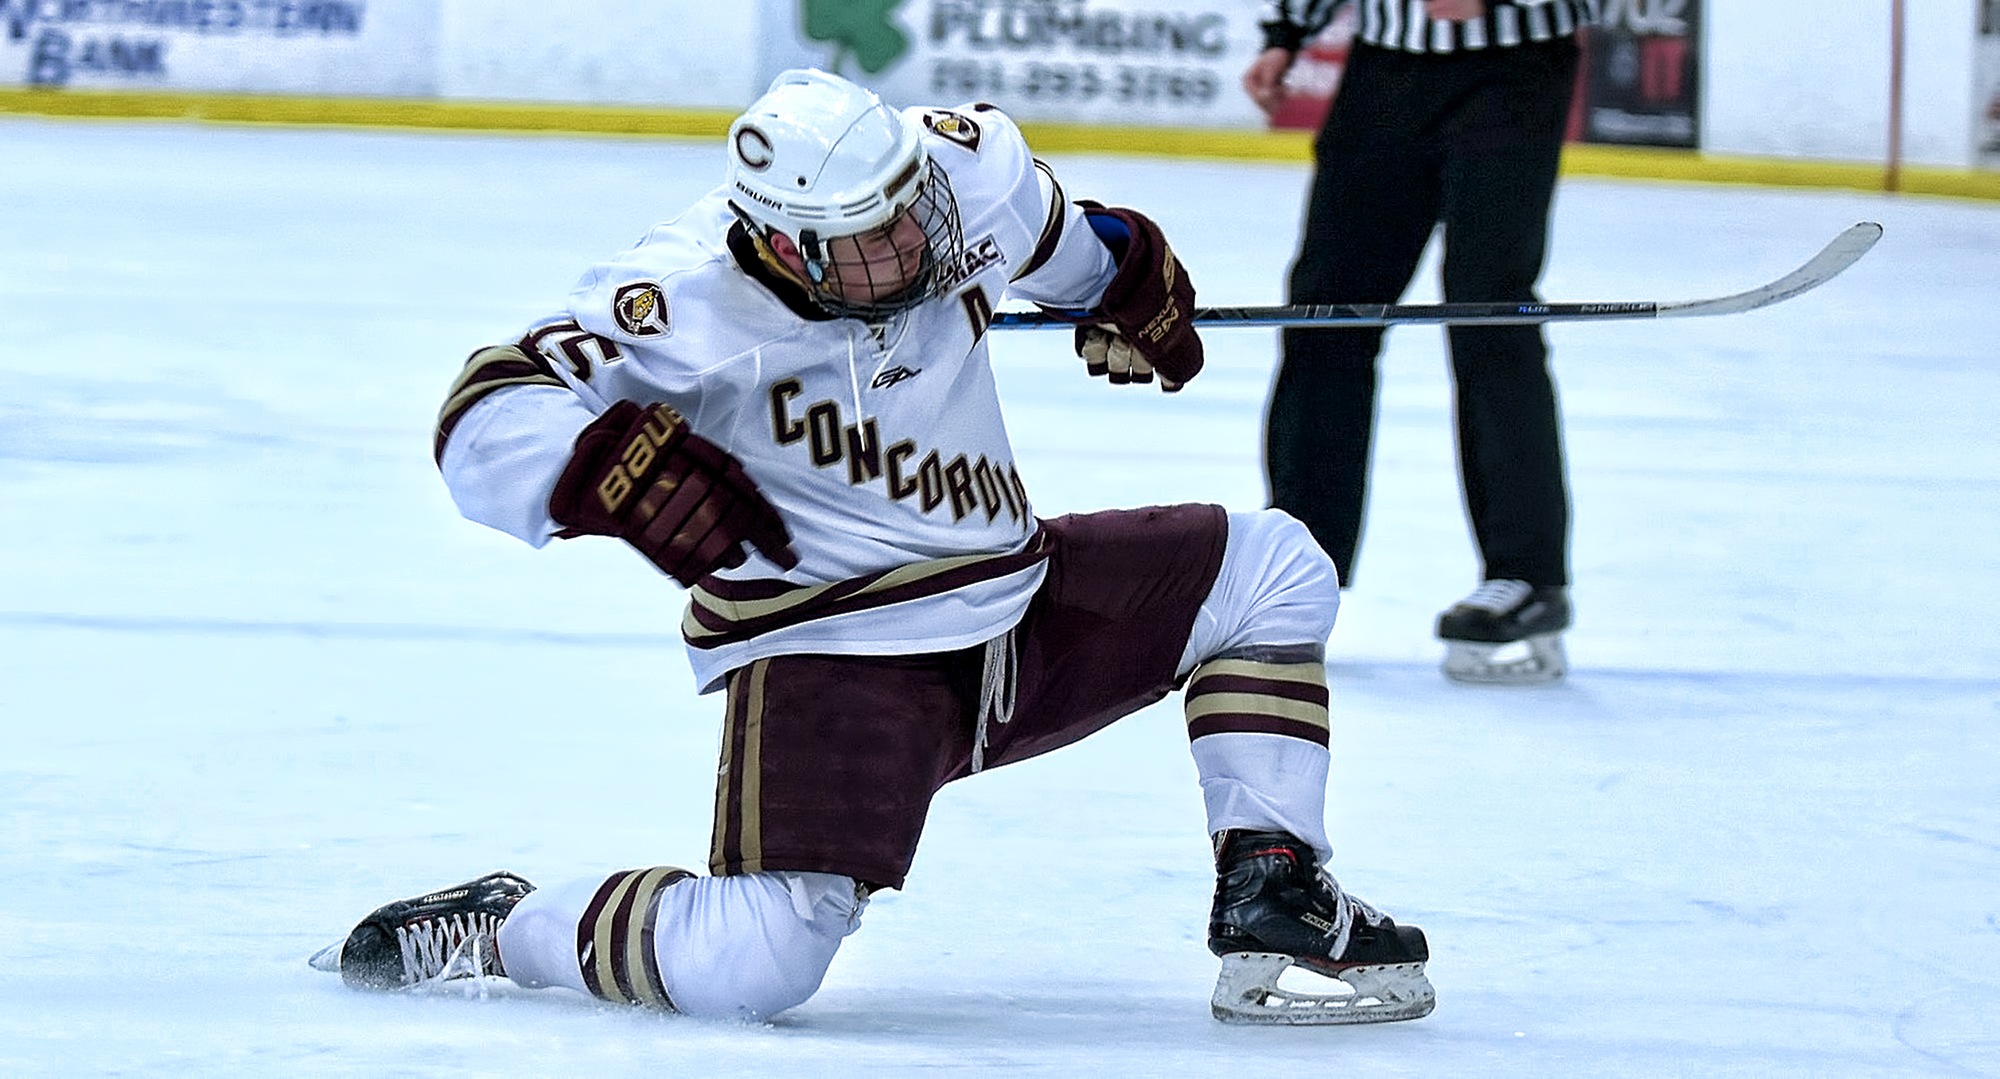 Senior Mario Bianchi celebrates his game-winning goal in the second period of the Cobbers' 2-1 win over St. John's.